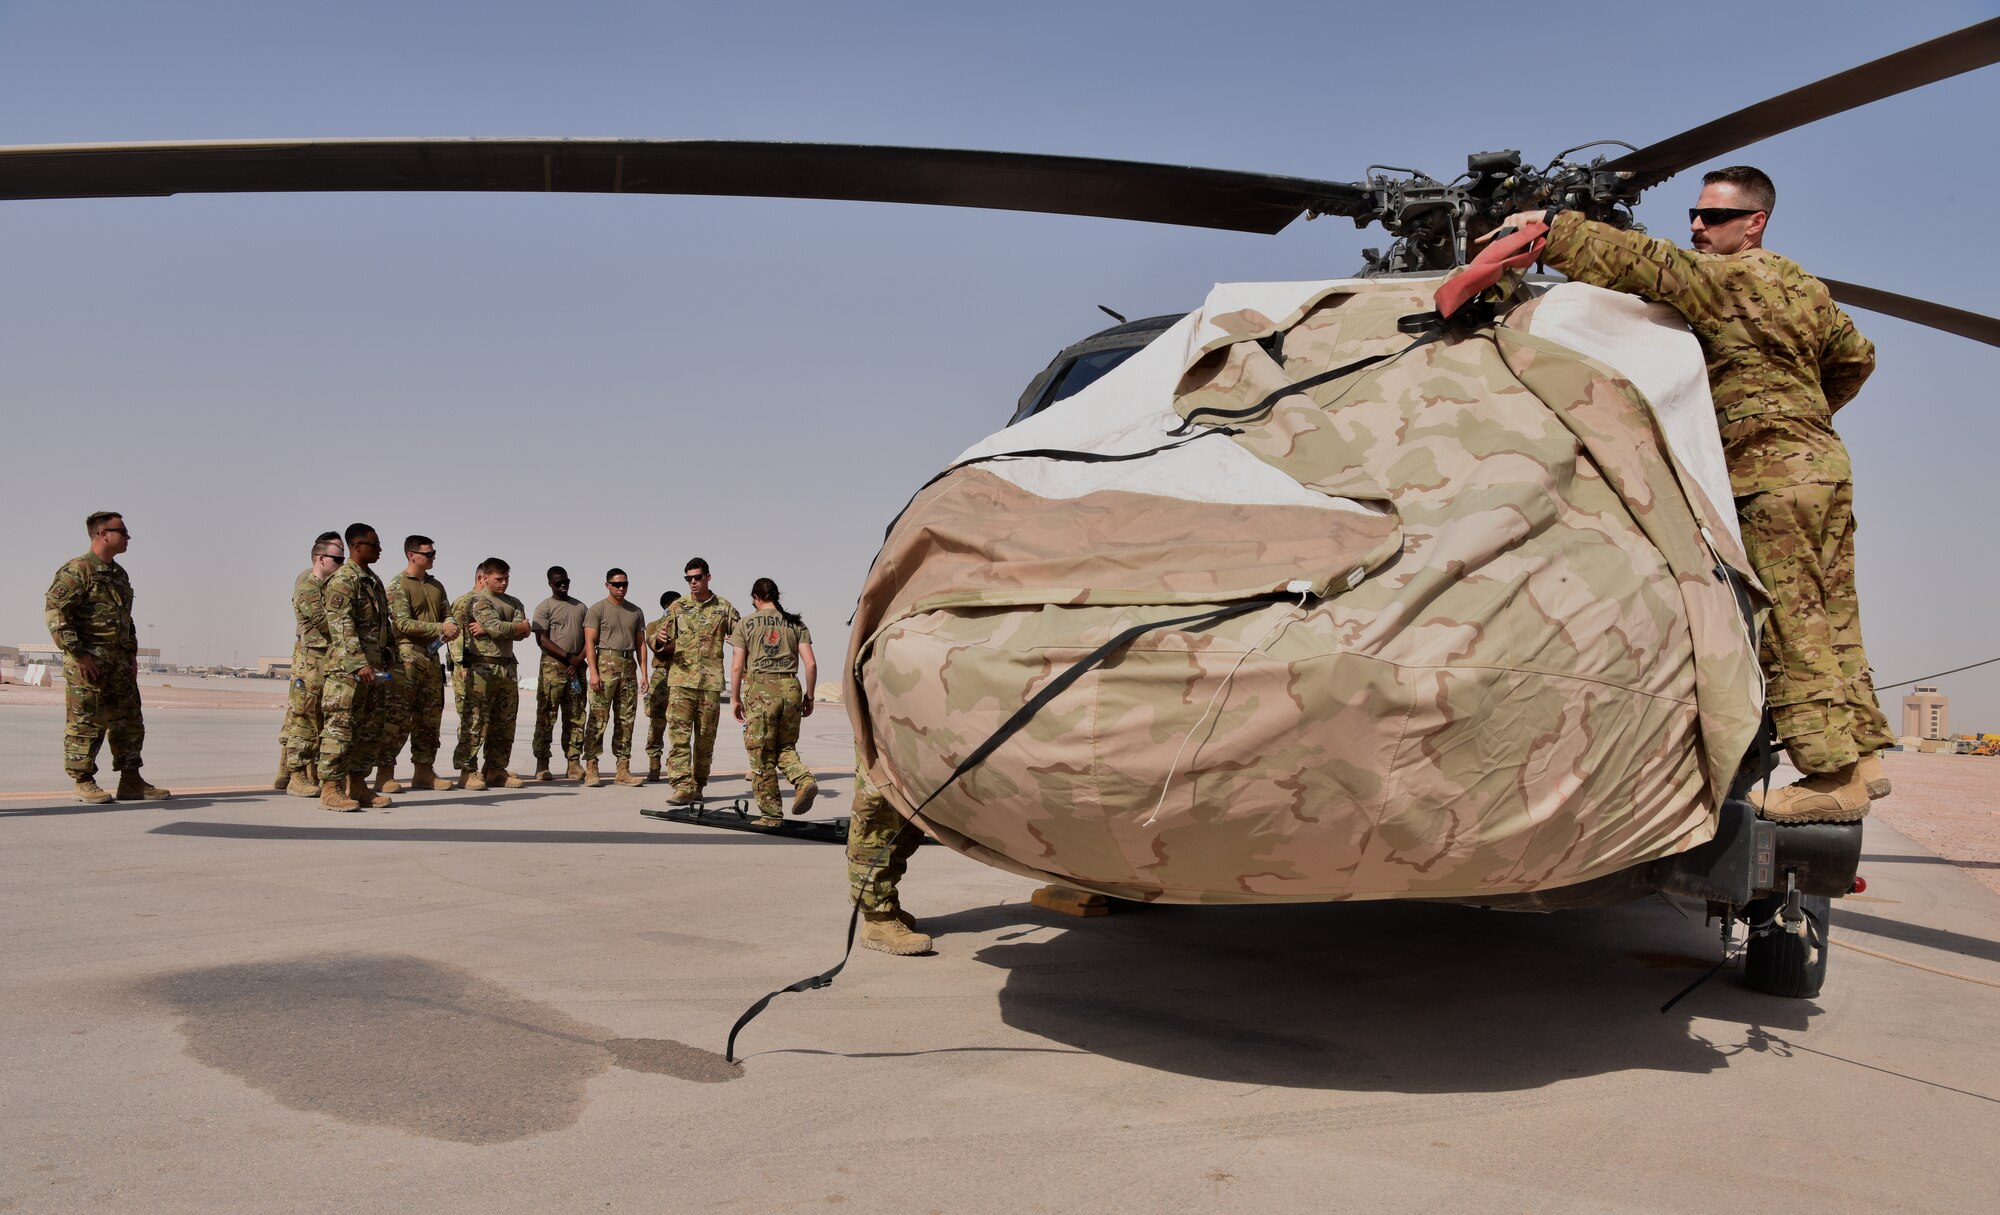 Members of the 378th Expeditionary Civil Engineering Squadron Fire Department receive familiarization training from members of Task Force Javelin at Prince Sultan Air Base, Kingdom of Saudi Arabia, June 25, 2020. The crucial training enables the 378th ECES to work seamlessly with members of TFJ to load critically injure or ill patients for Med-Evac, quickening the loading of patients while maintaining a safe environment for responders.